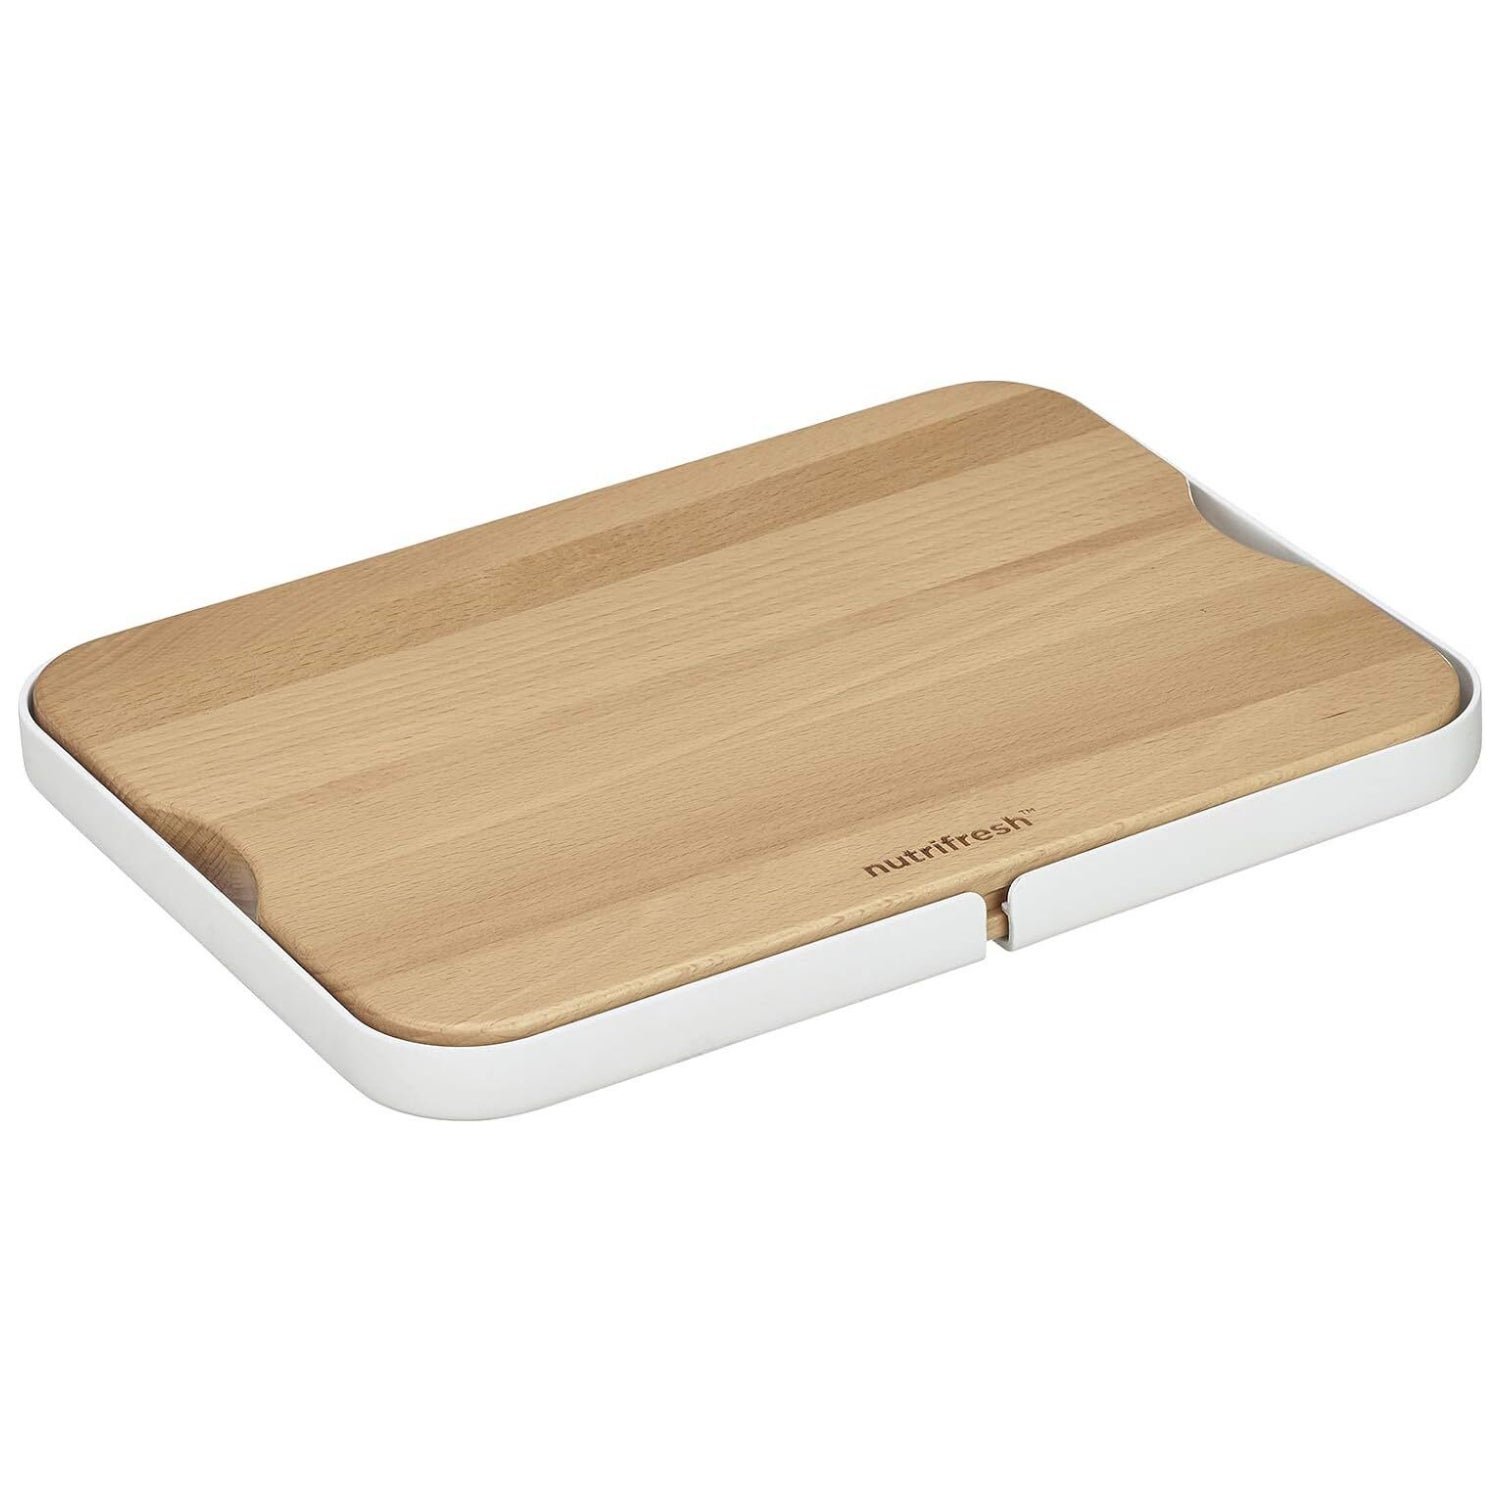 Wooden Chopping Board With Slide Out Trays